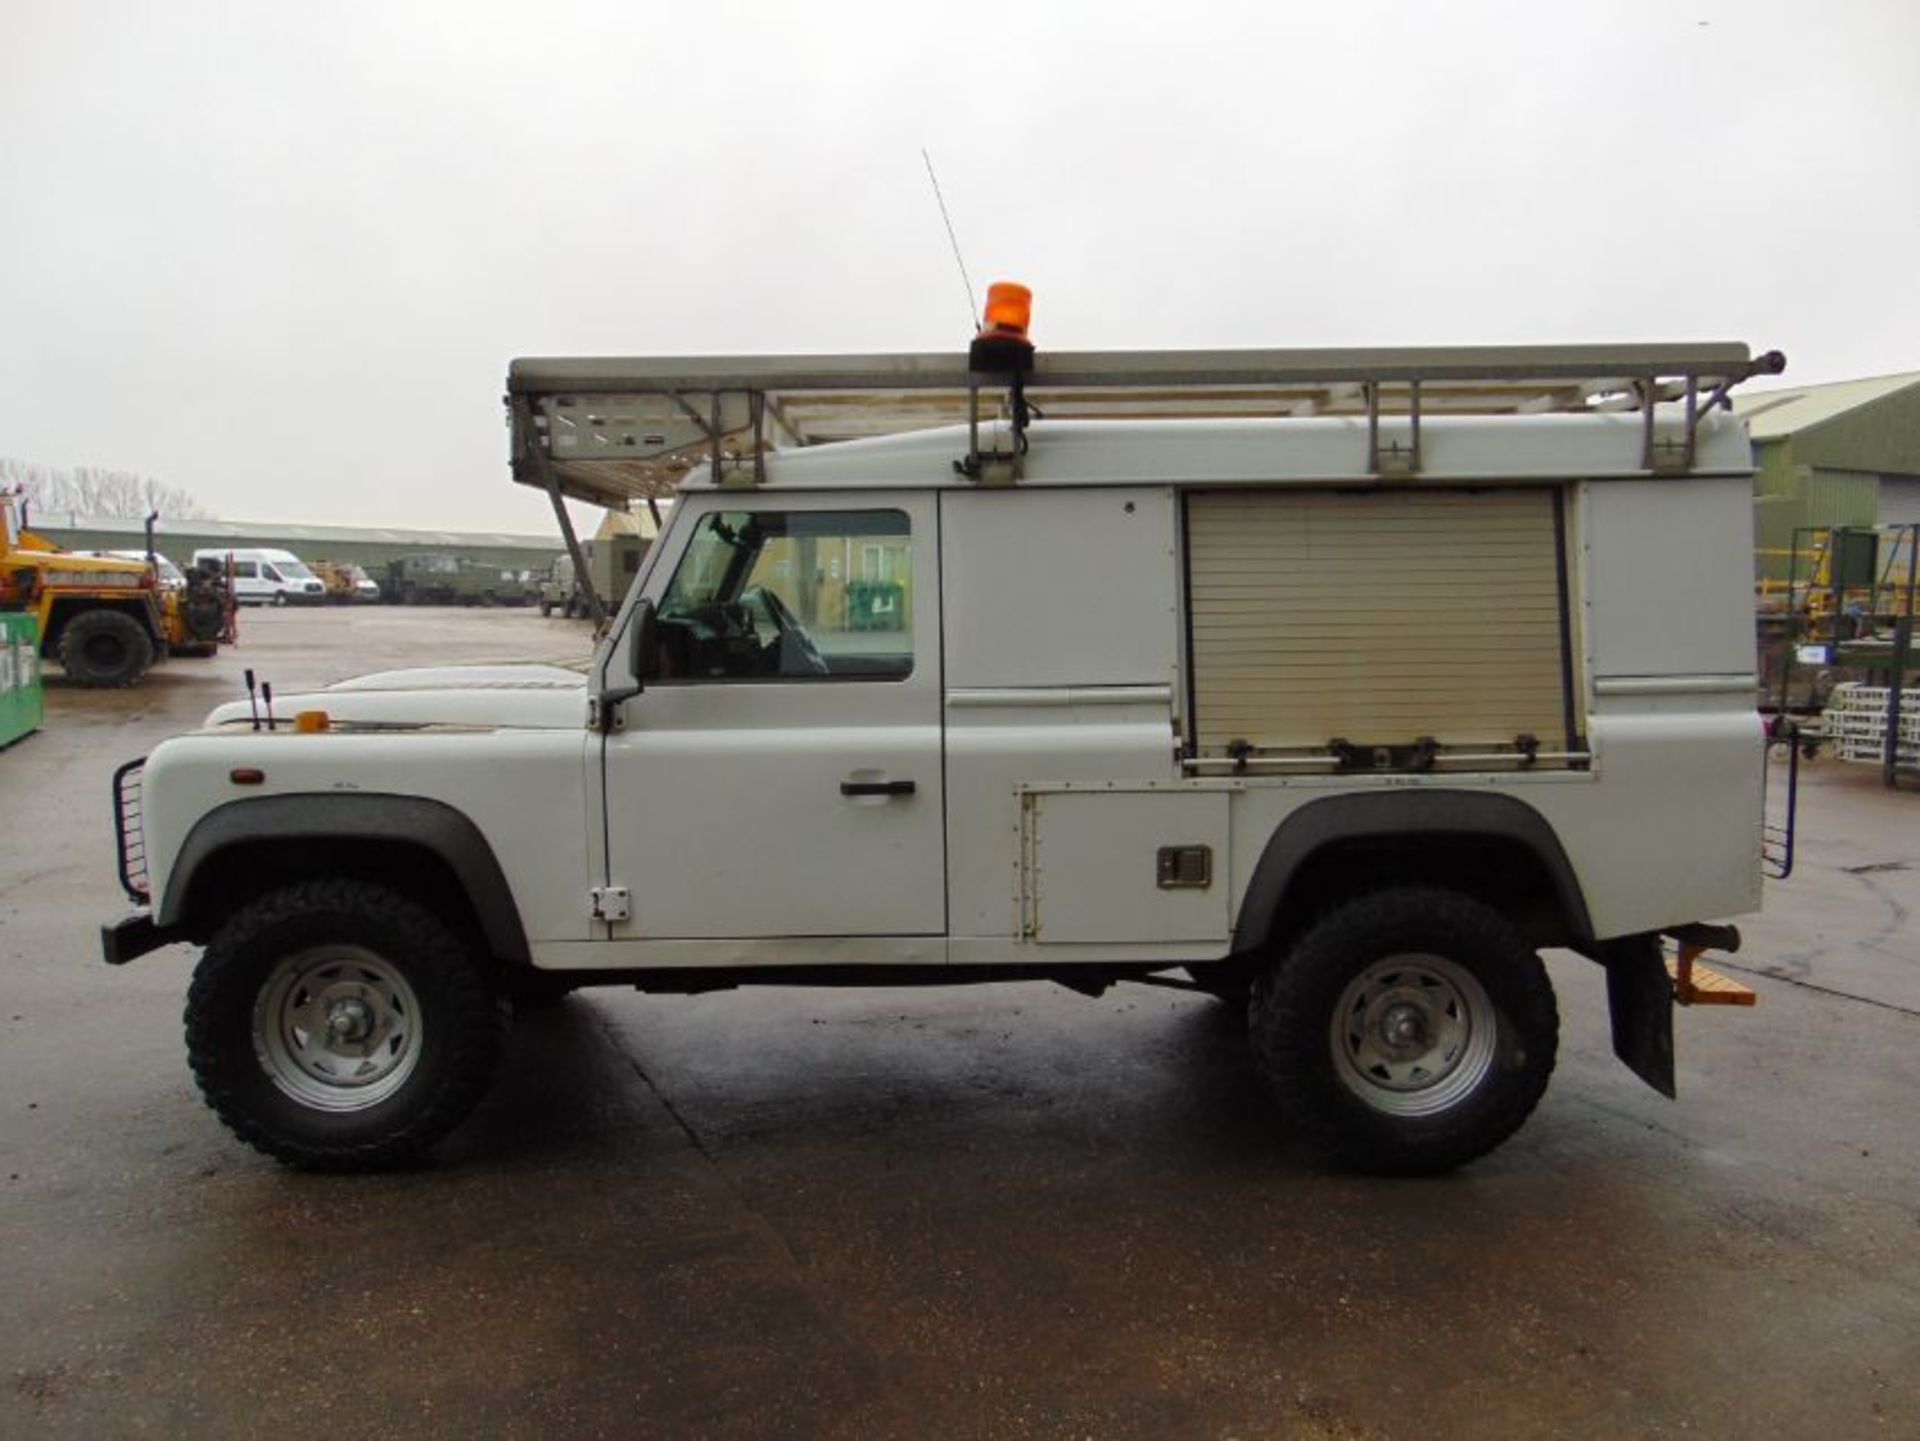 2011 Land Rover Defender 110 Puma hardtop 4x4 mobile workshop with Winch Etc. From UK Utility Co. - Image 4 of 31